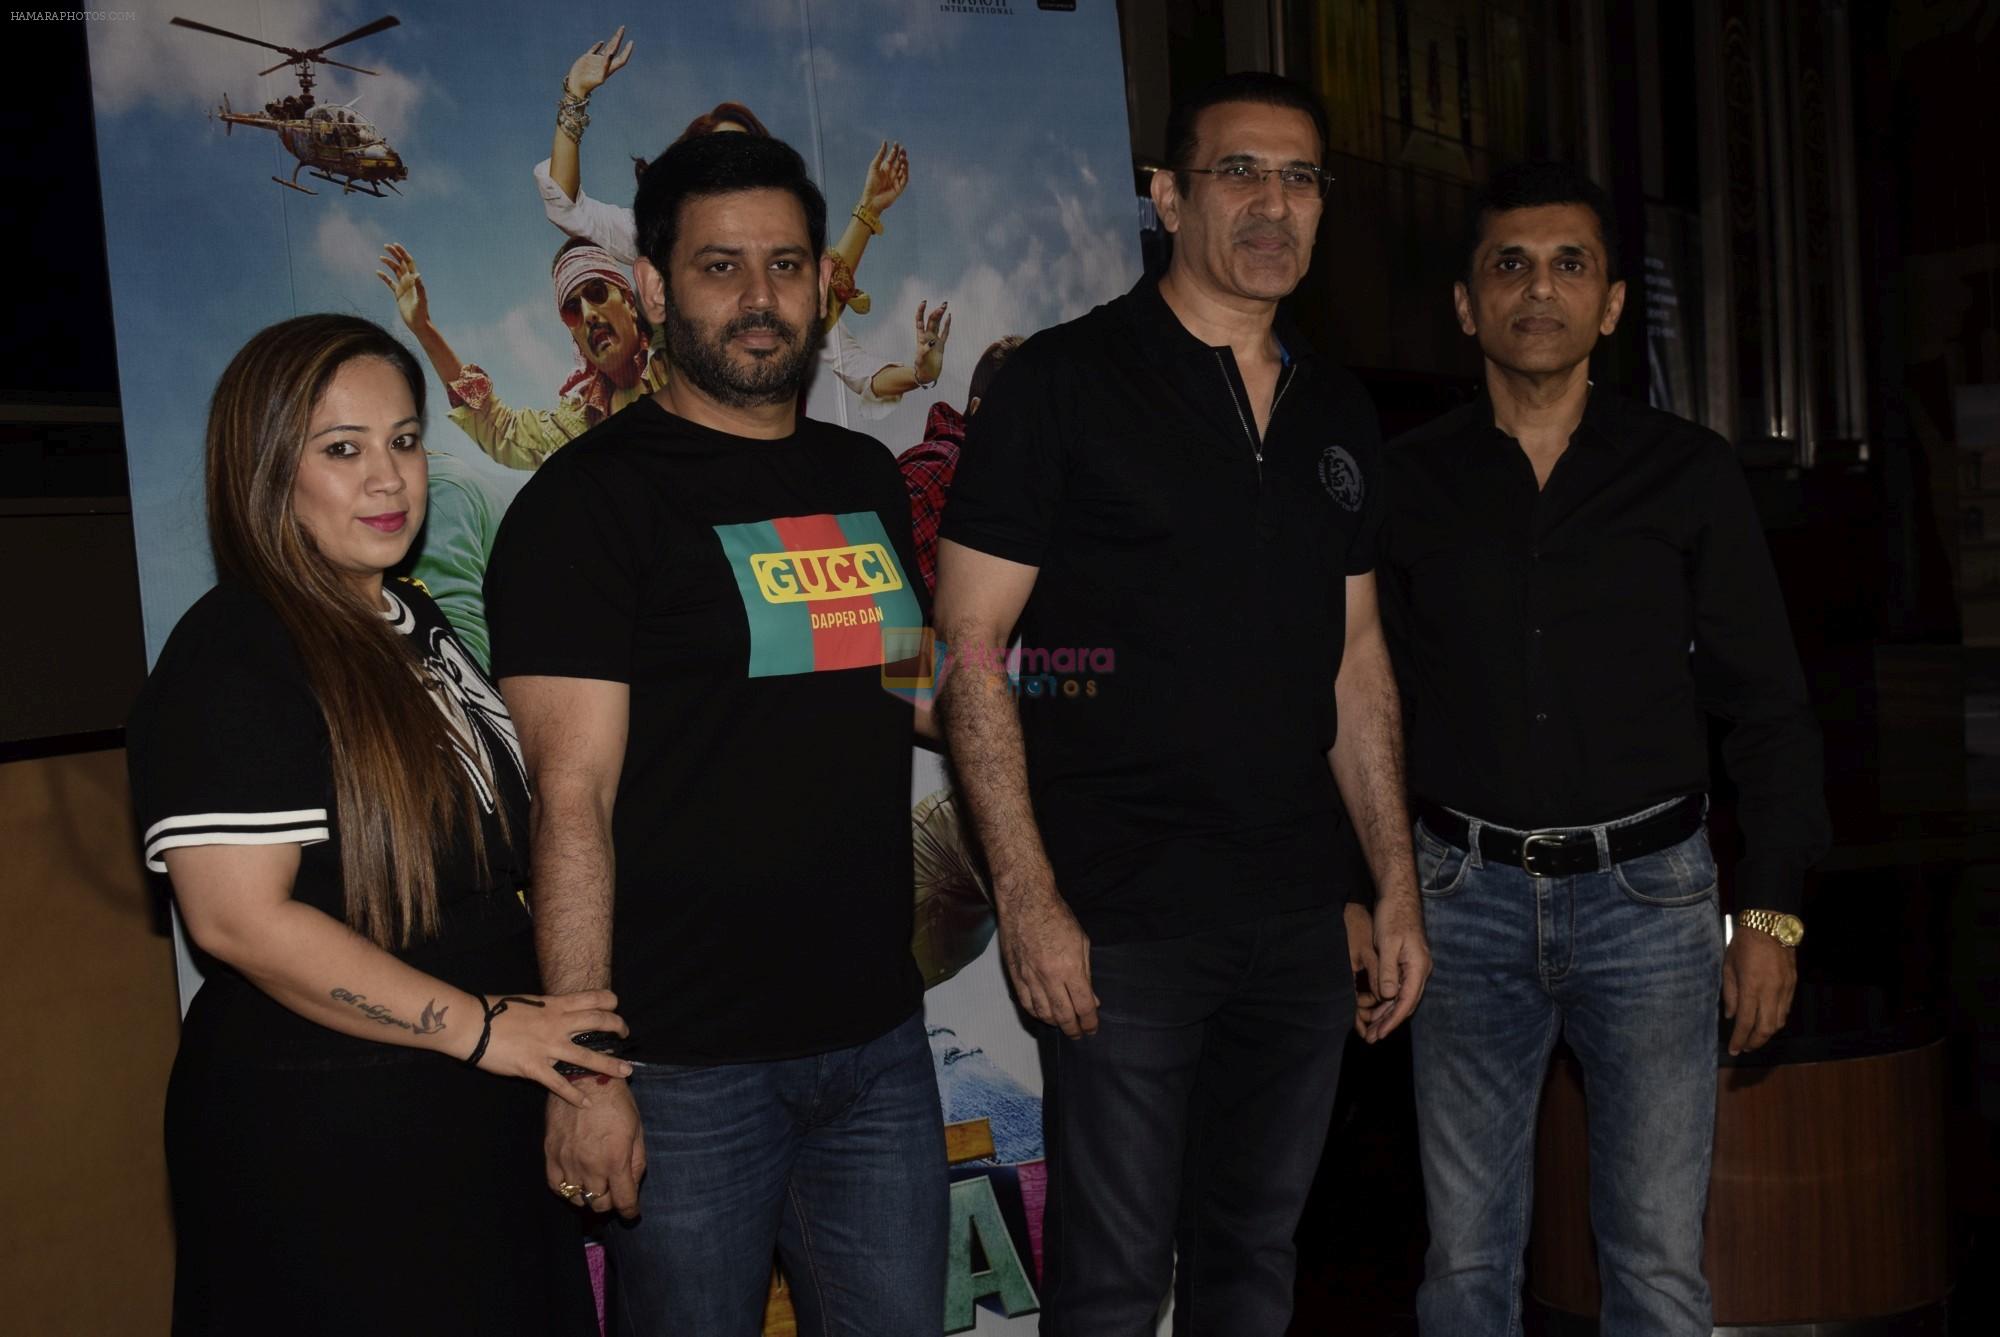 Parmeet Sethi at the Screening Of Total Dhamaal At Pvr on 23rd Feb 2019